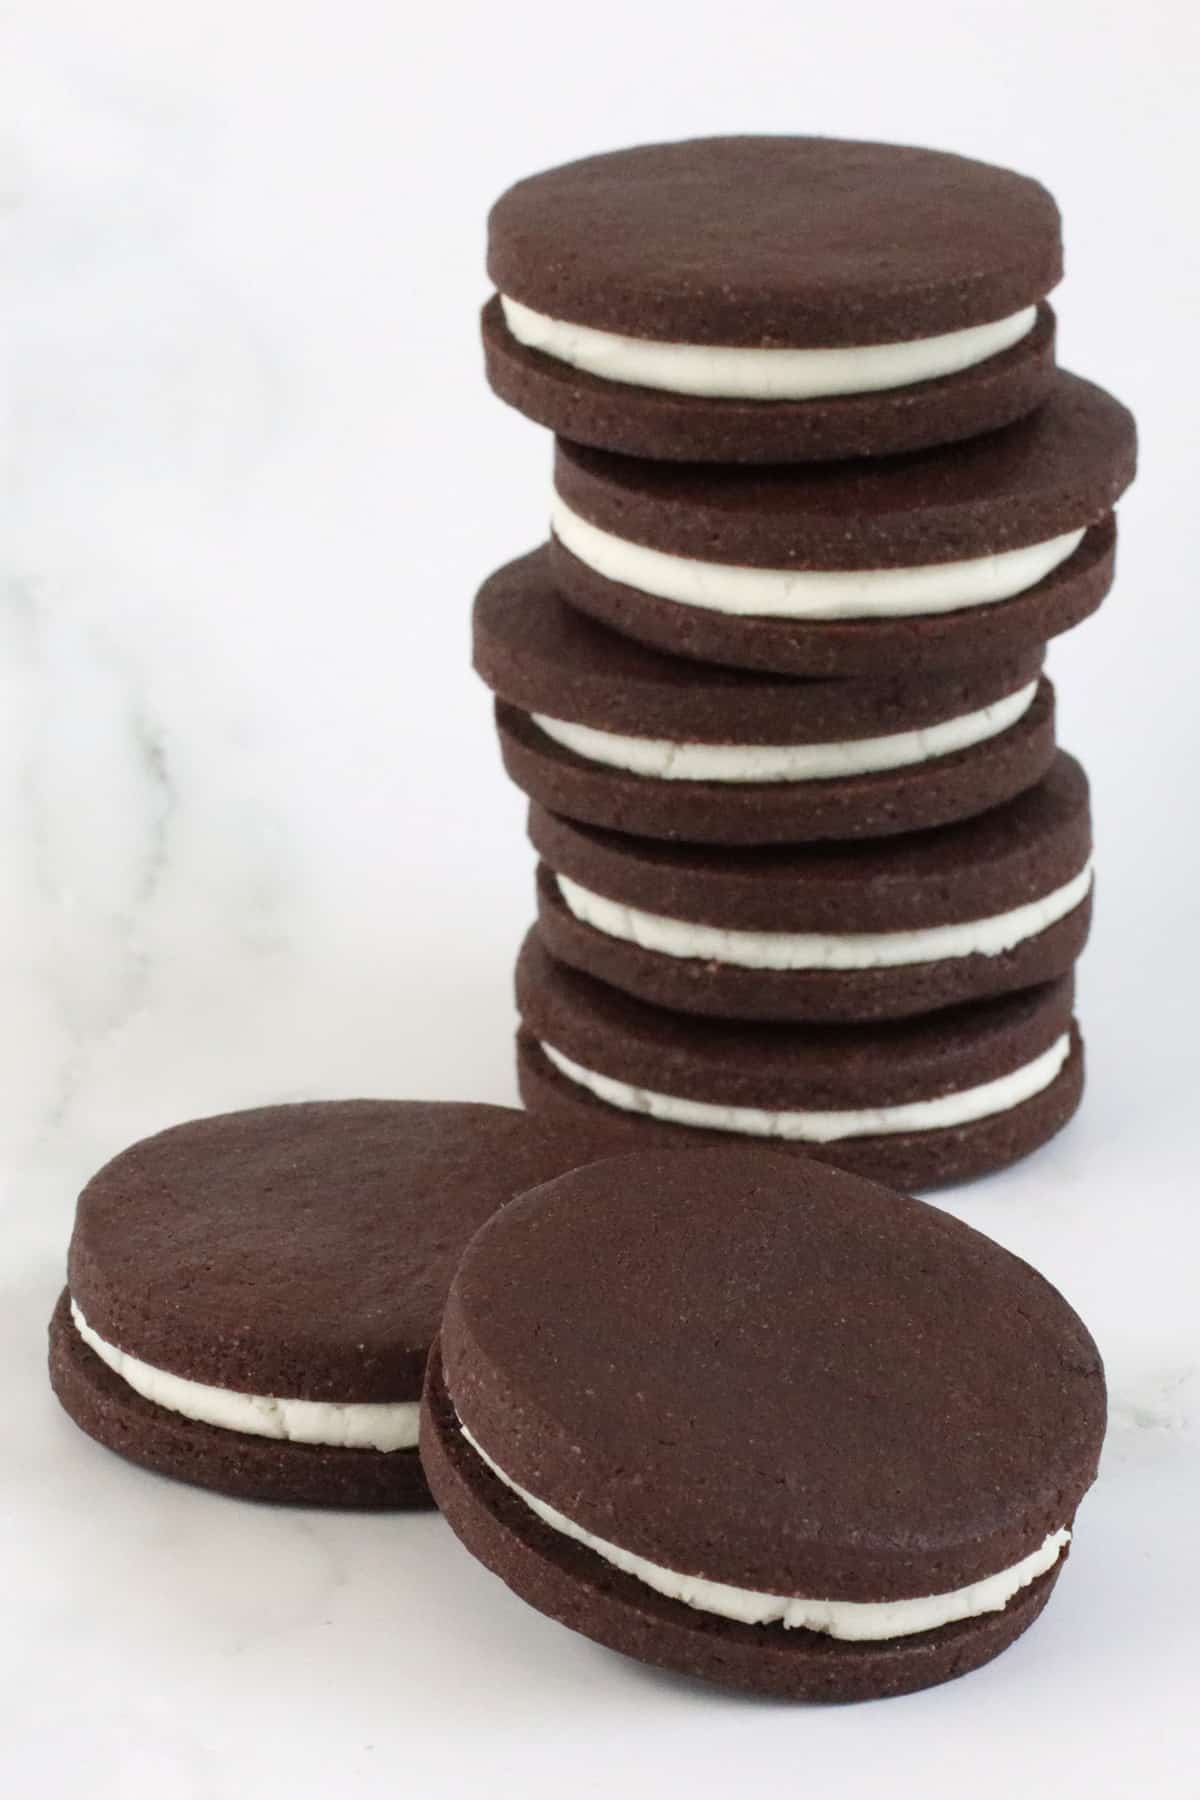 homemade oreos with round chocolate sandwich cookies filled with vanilla cream